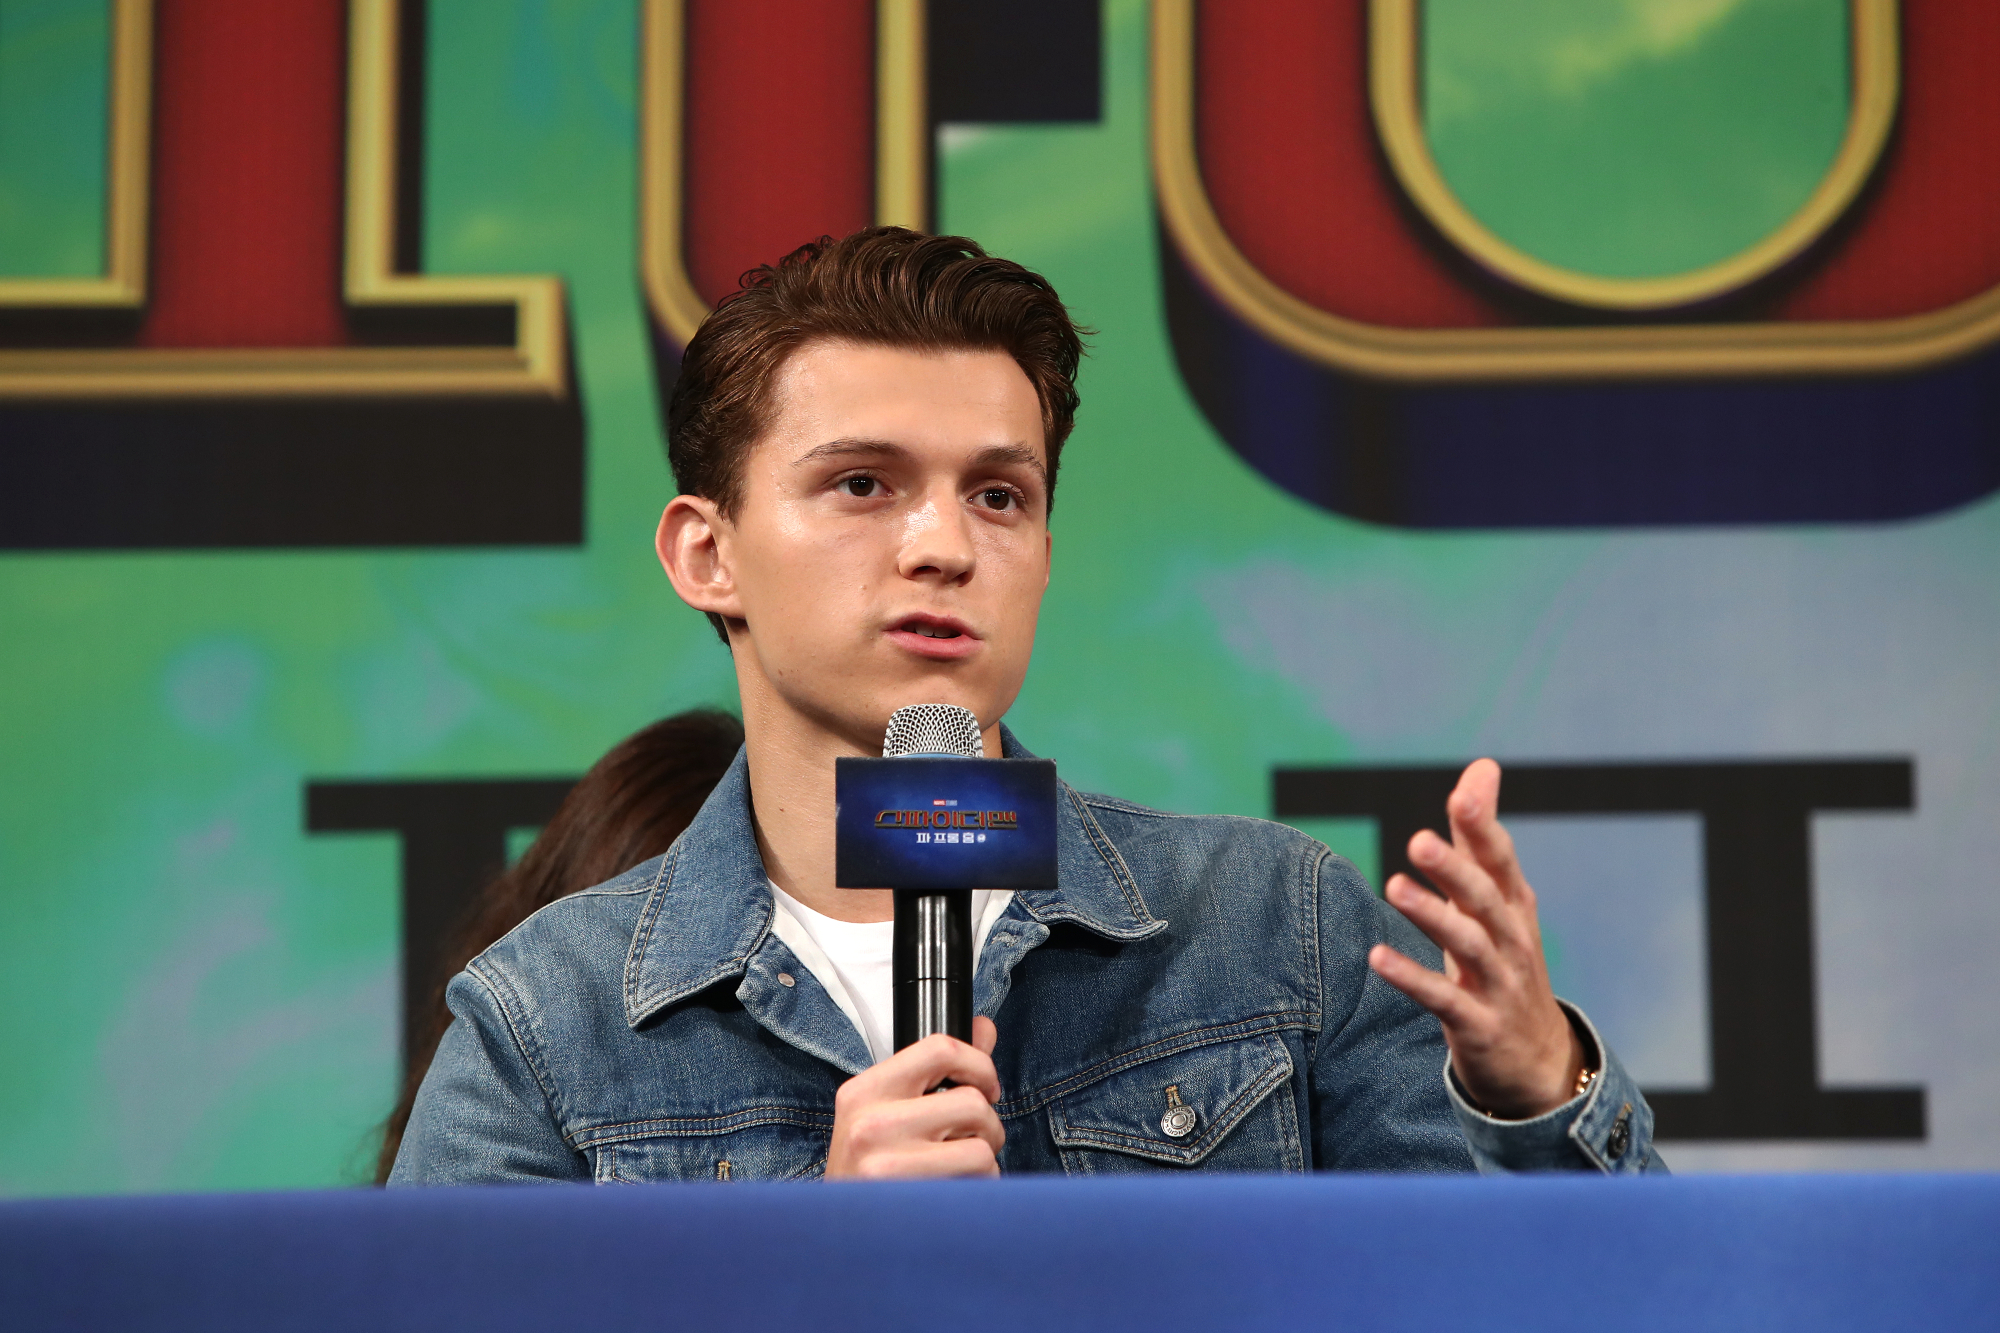 Tom Holland talks into microphone at MCU 'Spider-Man: Far From Home' event